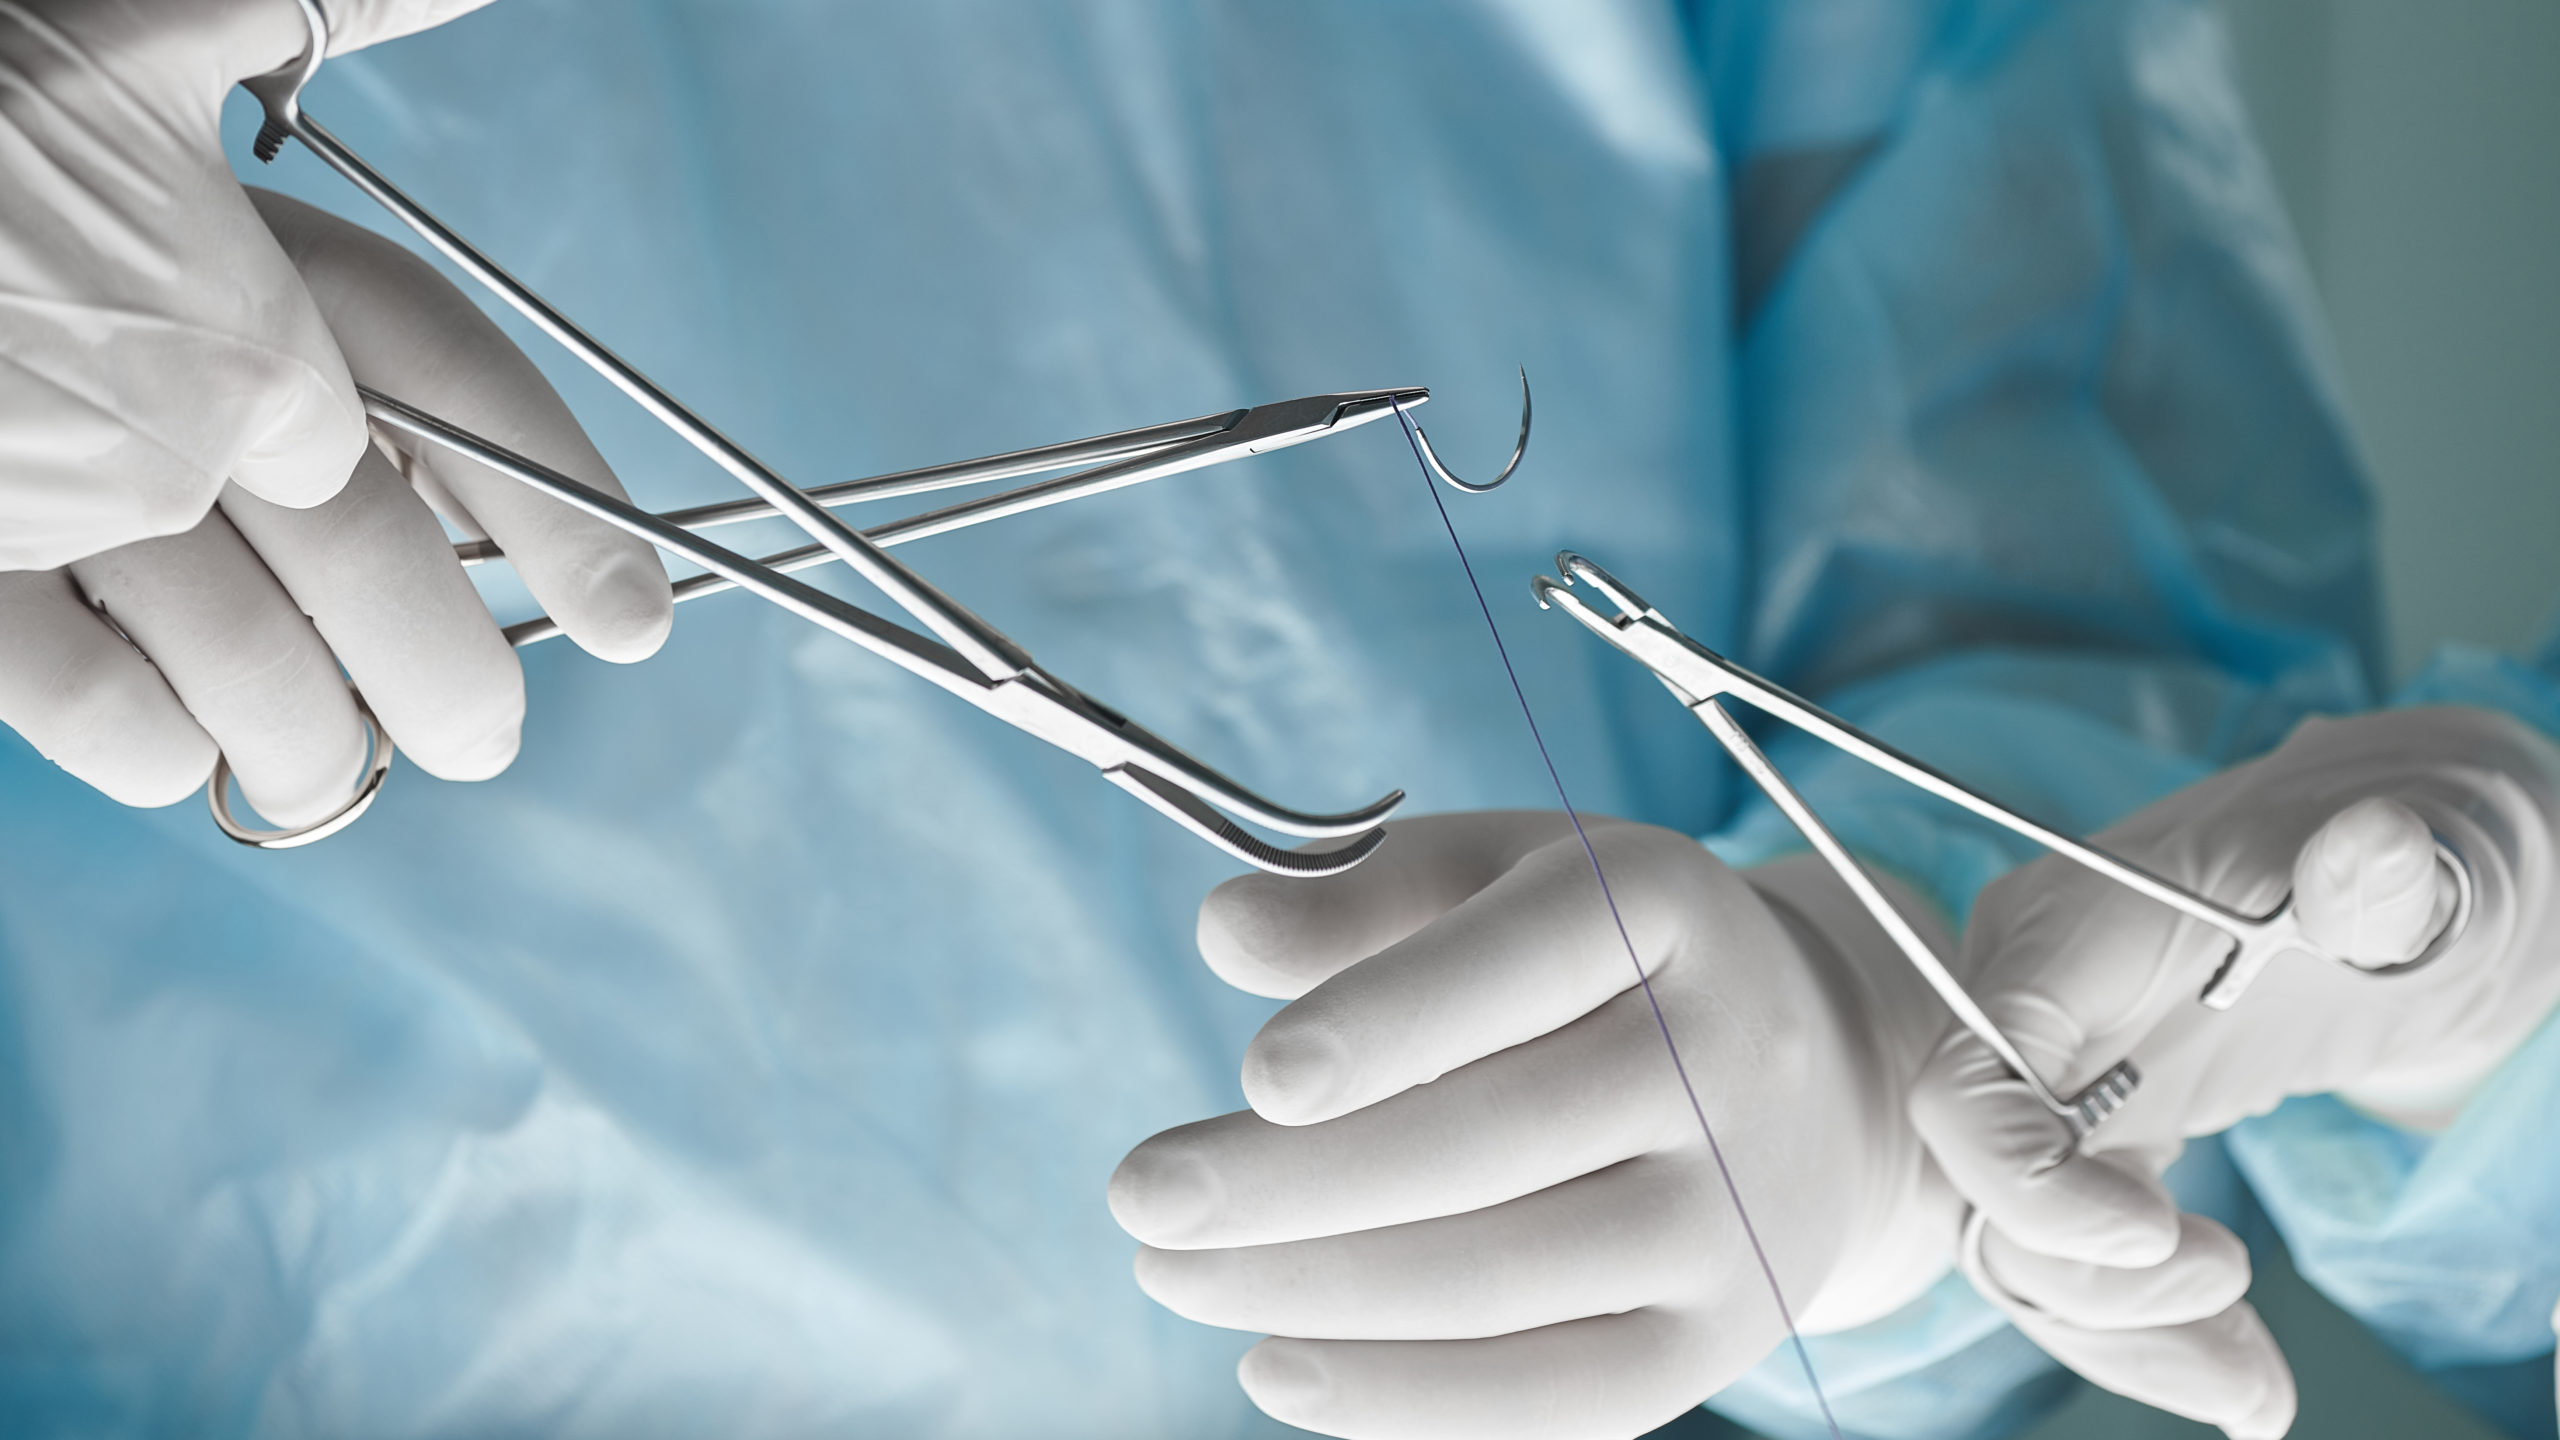 China’s wound surgery market outlook: domestic players win market share in tier 3 and 4 cities